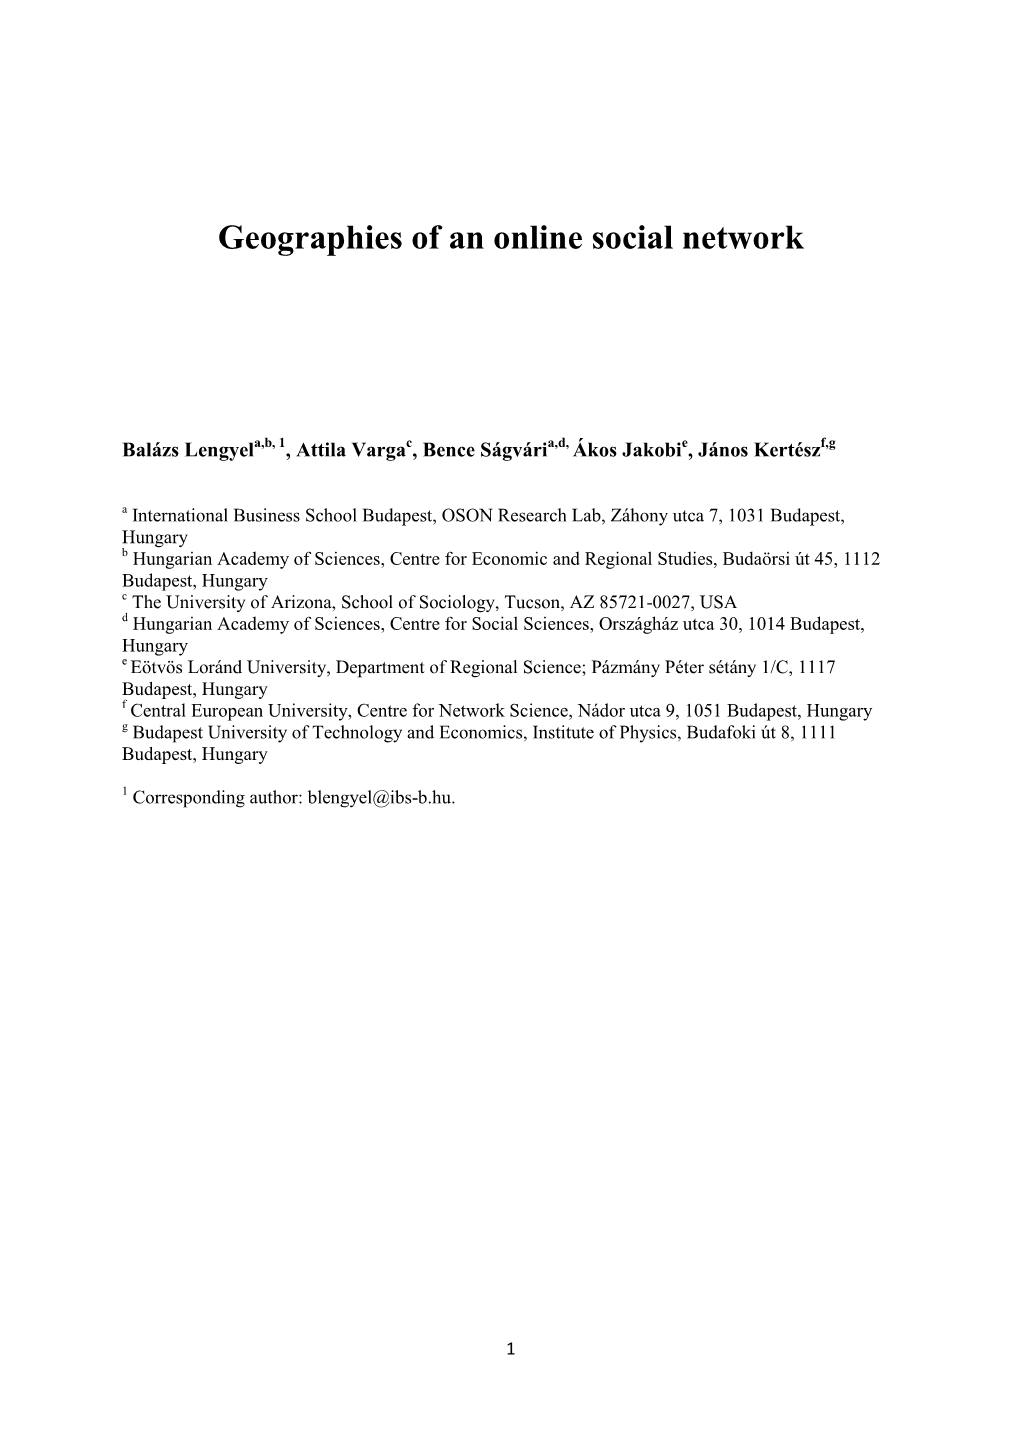 Geographies of an Online Social Network